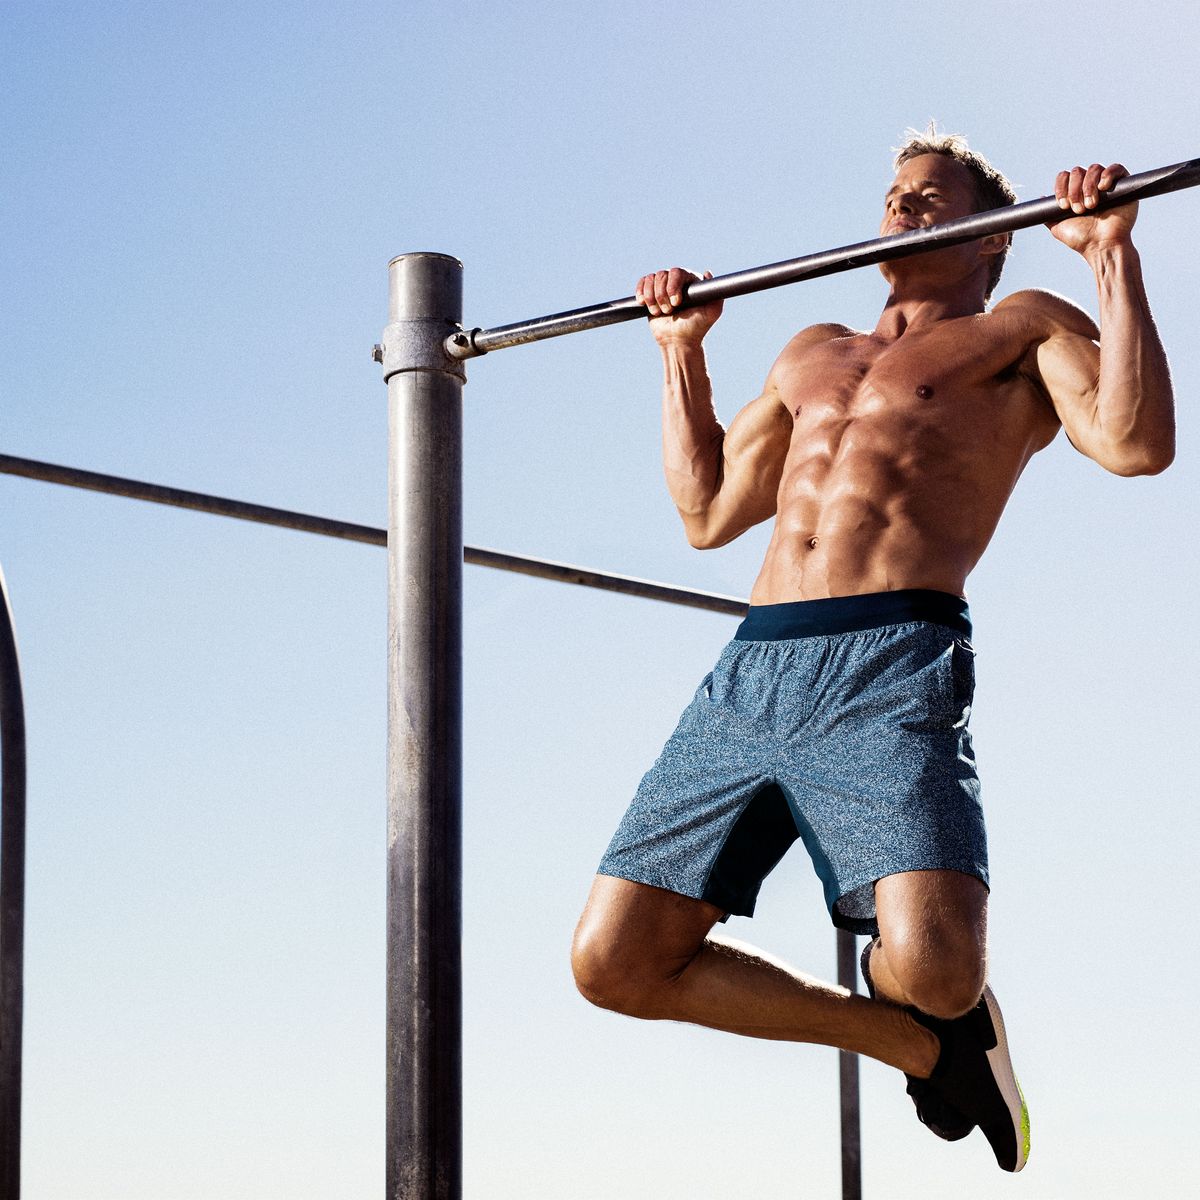 Get Strong With Just a Pull-Up Bar - Men's Journal